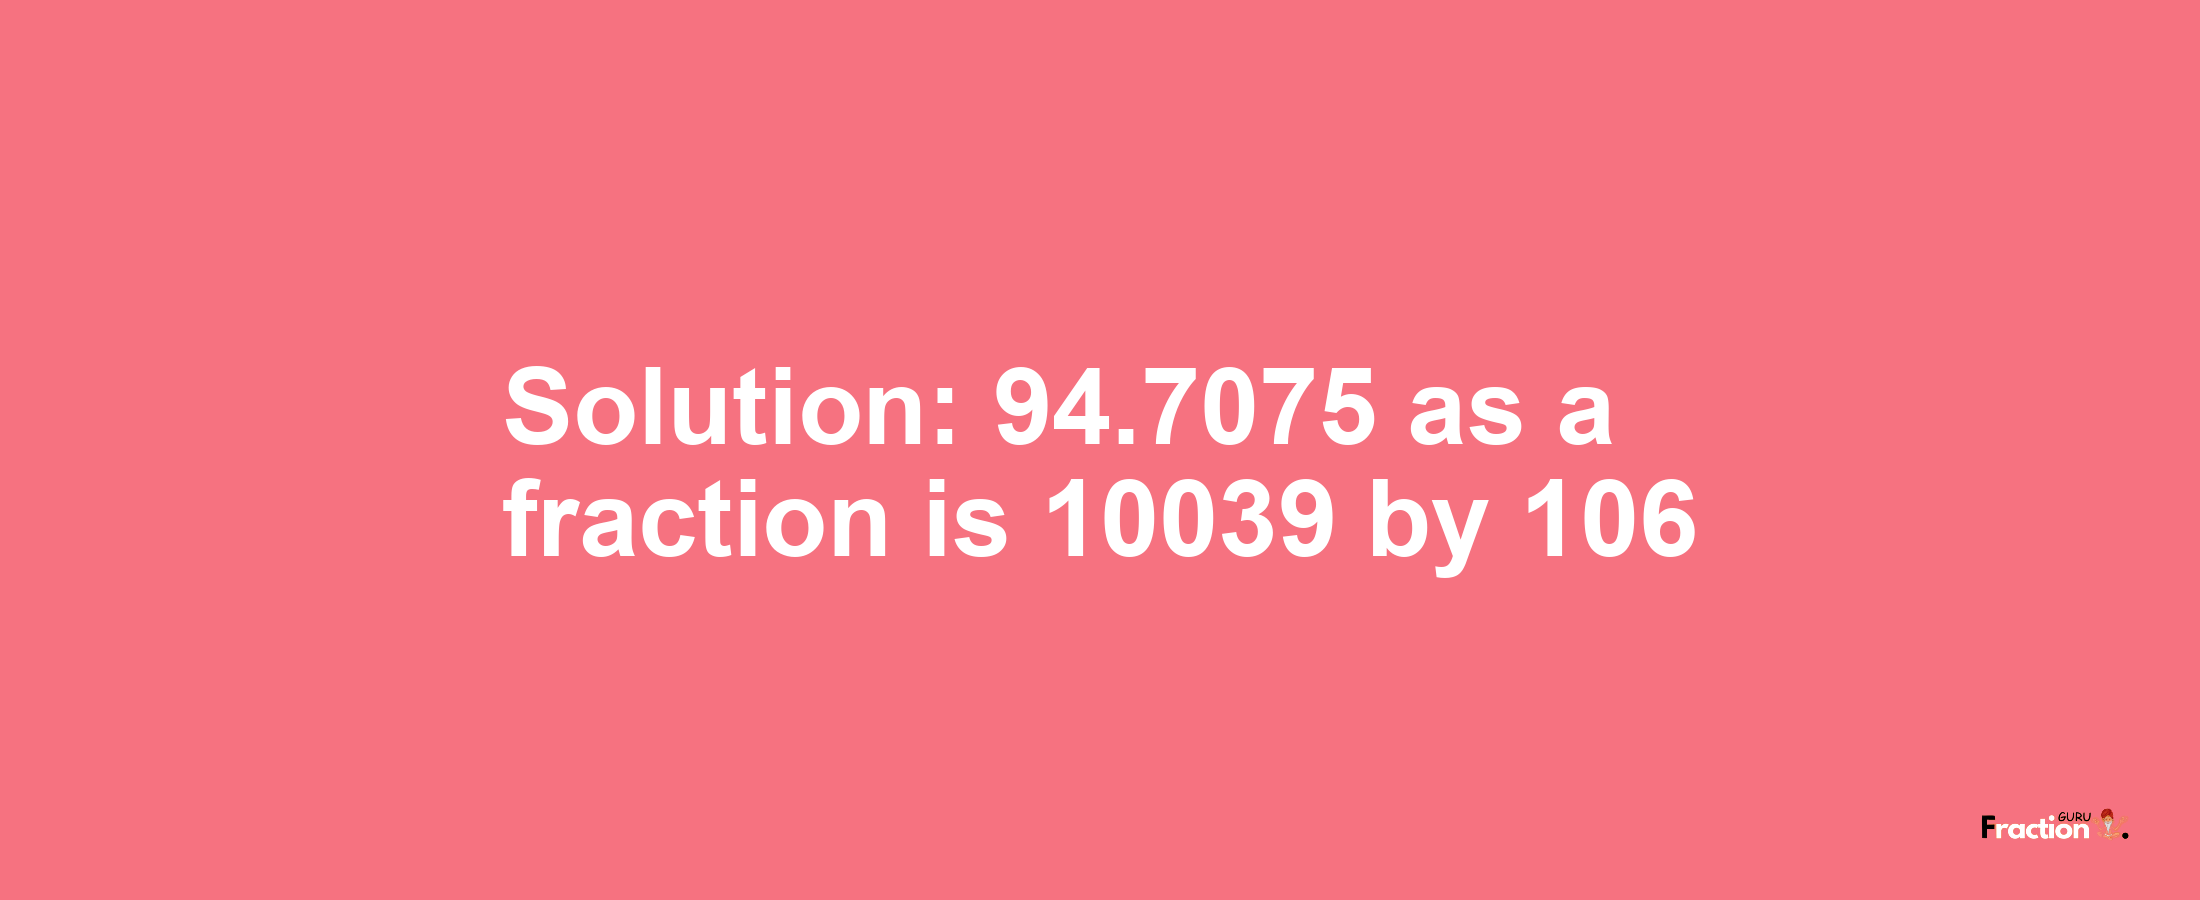 Solution:94.7075 as a fraction is 10039/106